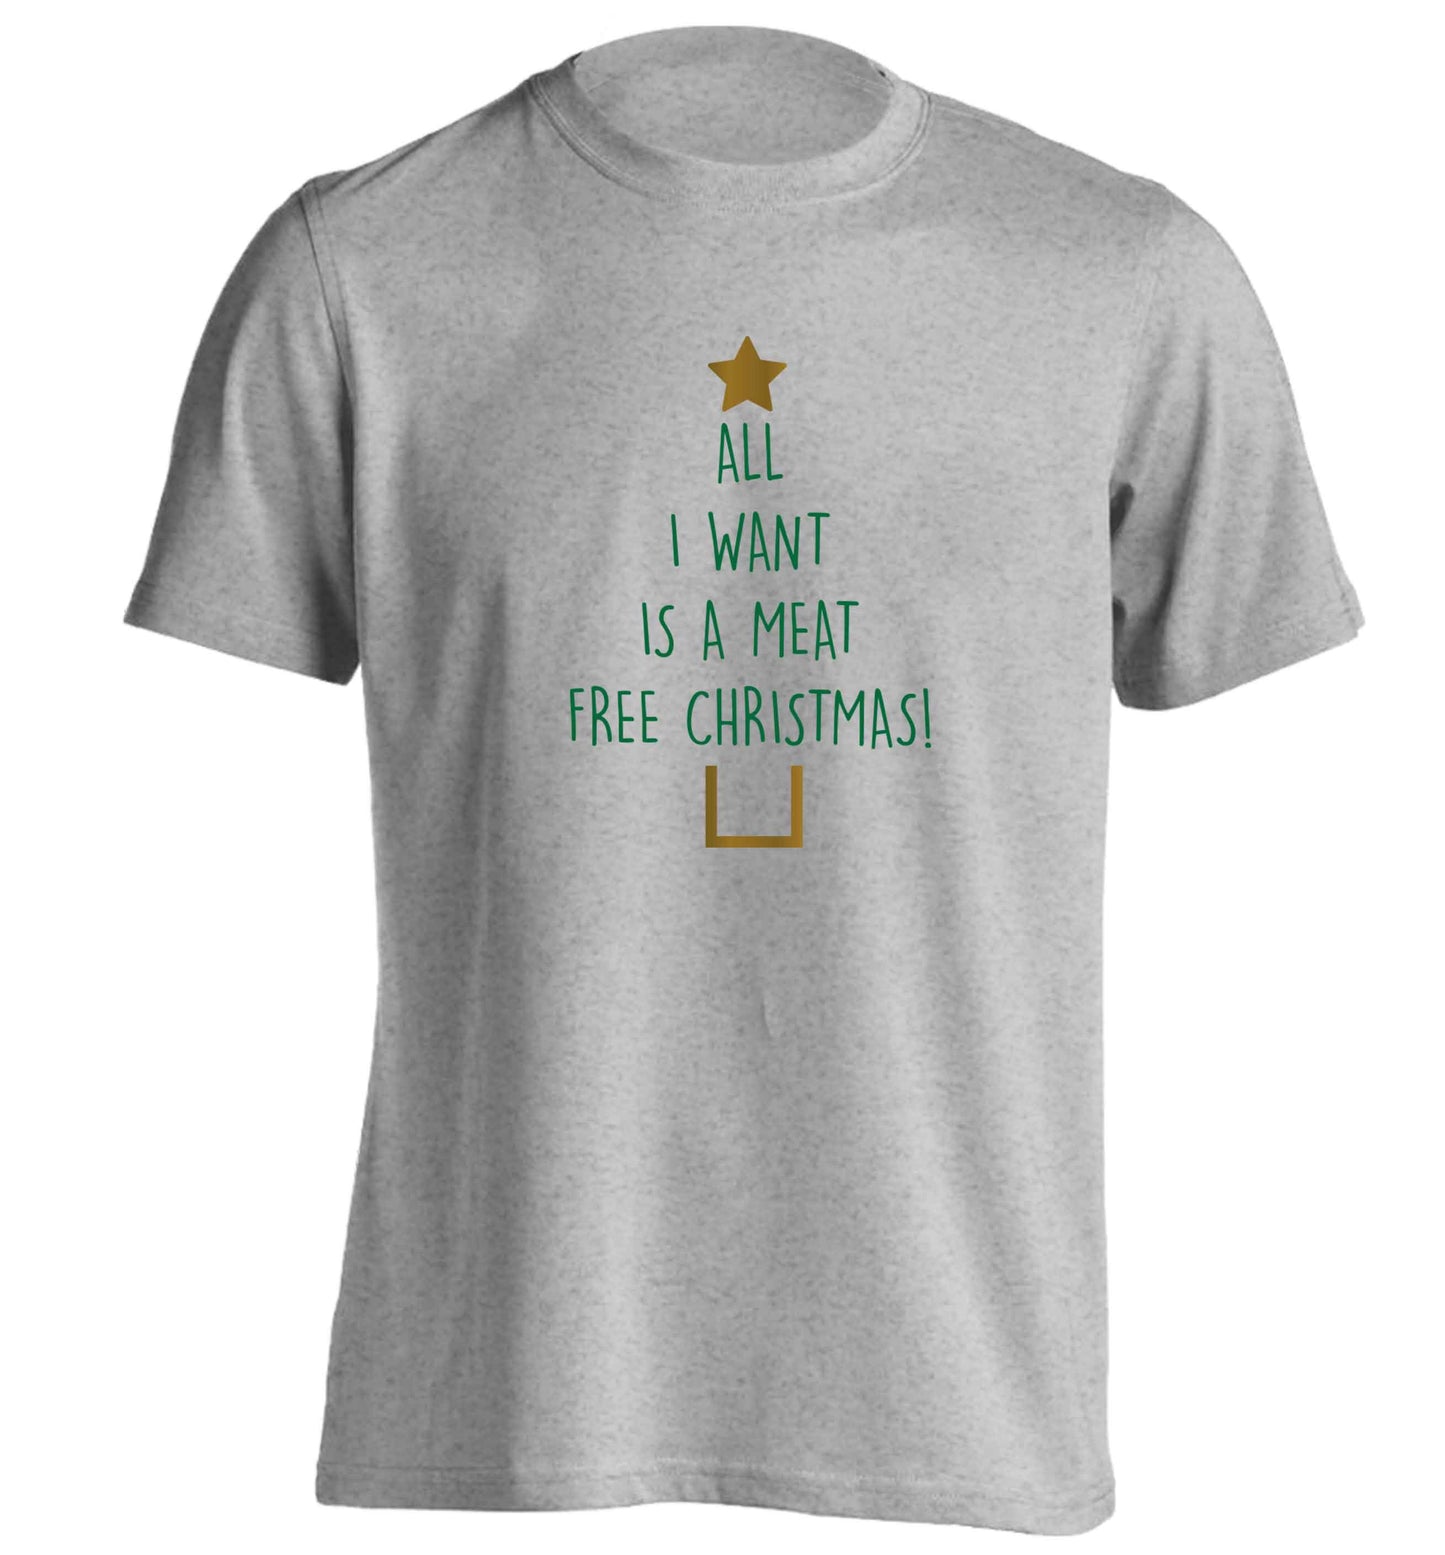 All I want is a meat free Christmas adults unisex grey Tshirt 2XL